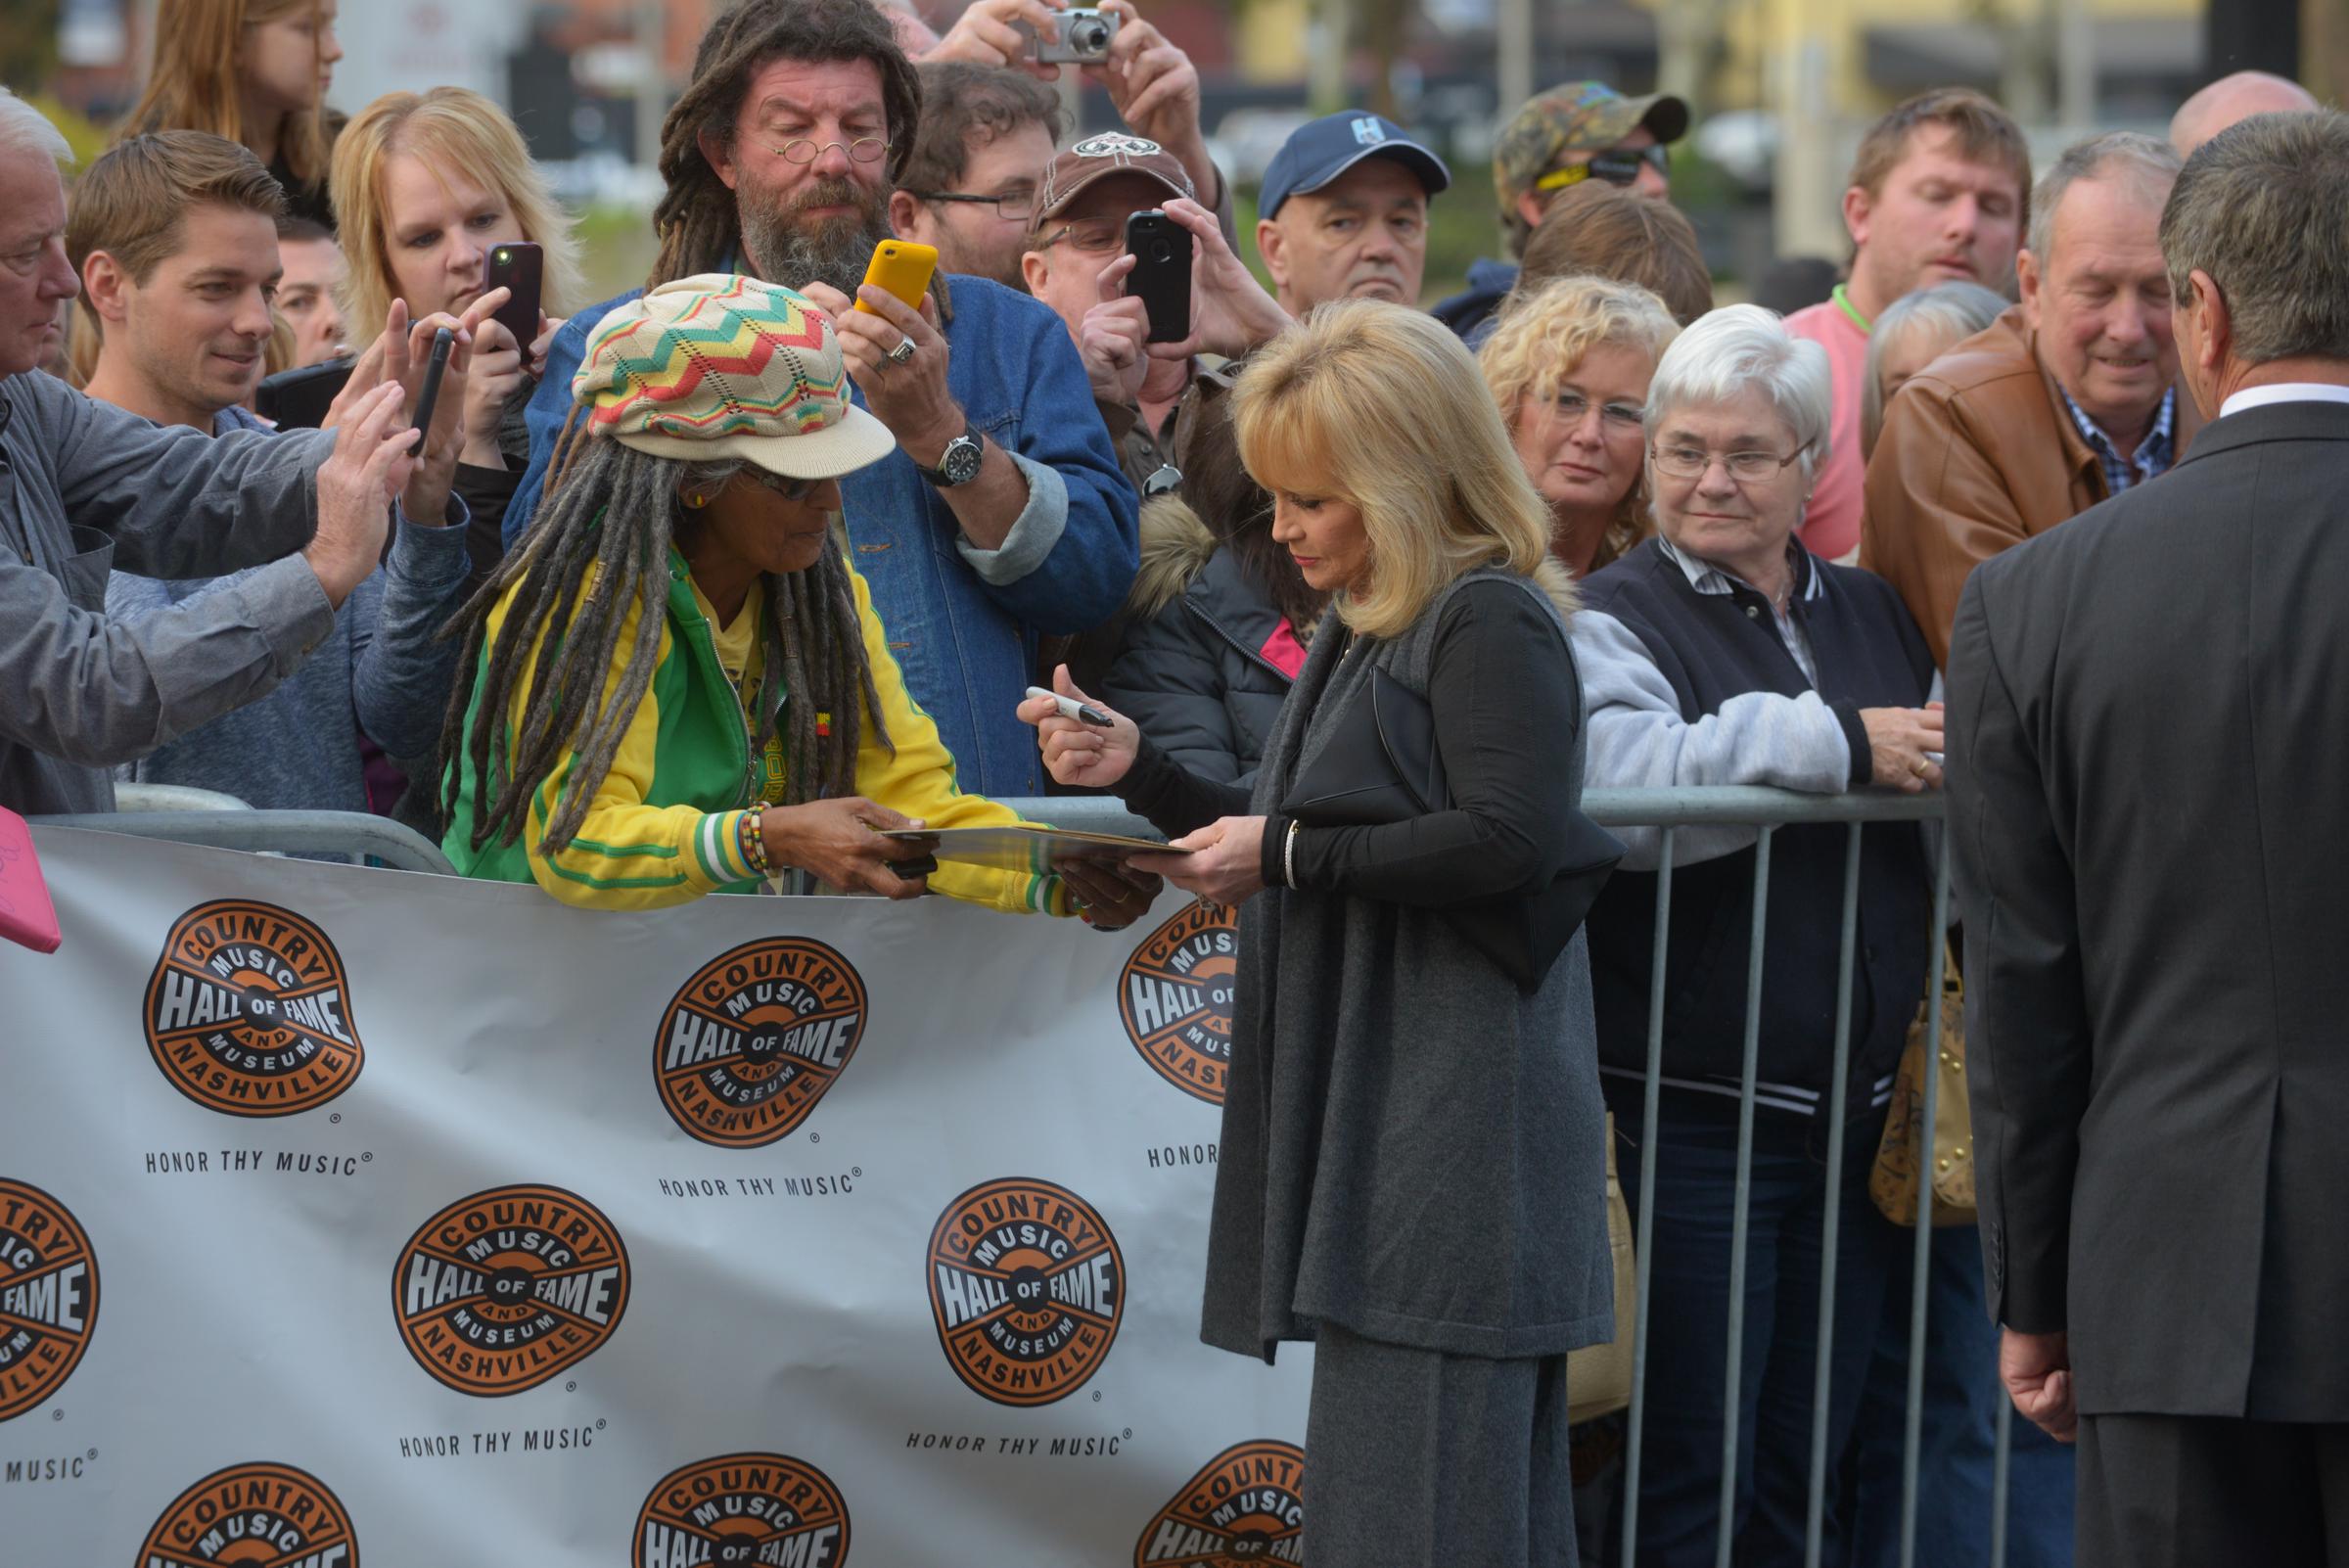 Barbara Mandrell arrives and greets fans at the Country Music Hall of Fame Medallion ceremony in Nashville, Tennessee, on October 27, 2013. | Source: Getty Images